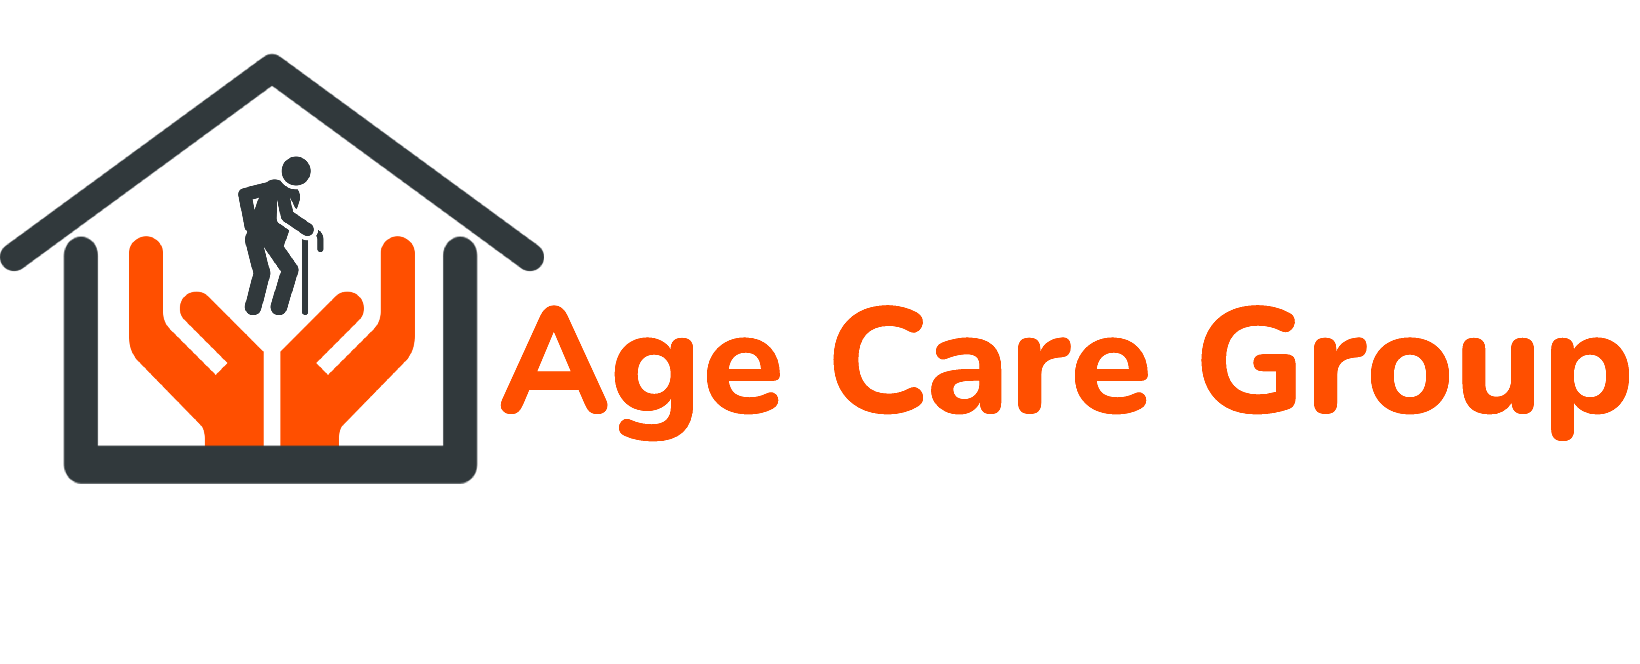 Age Care Group